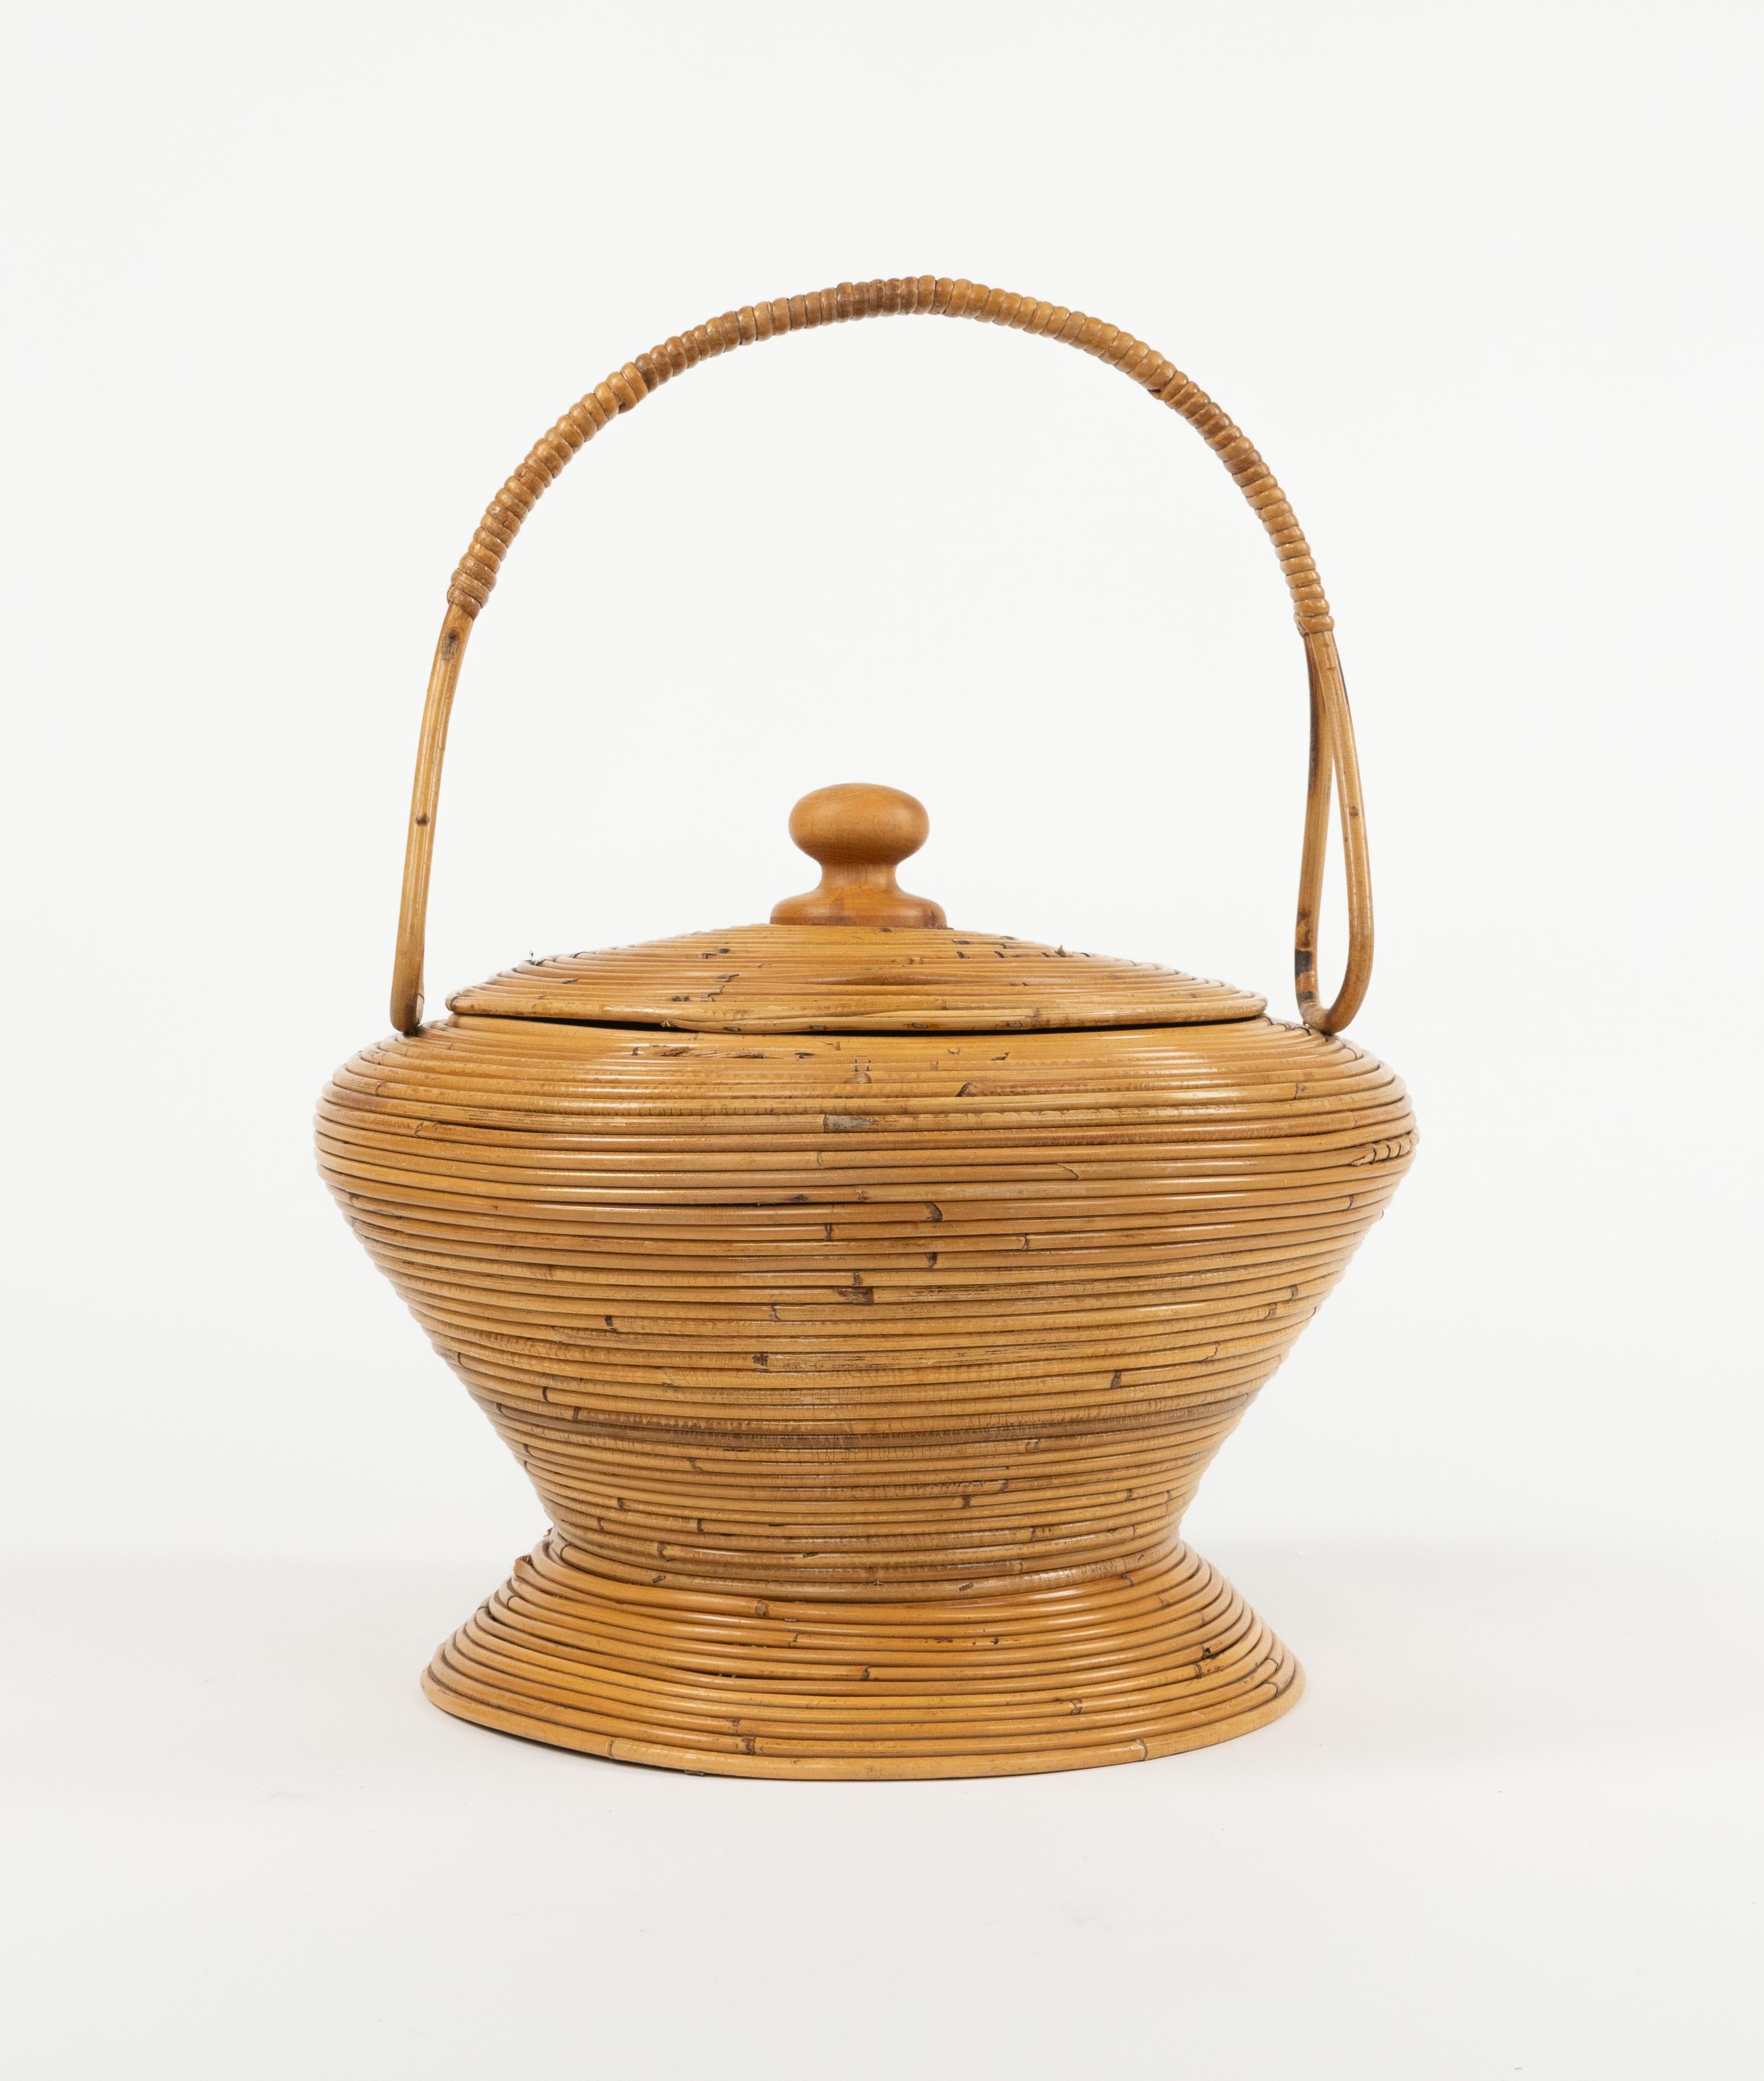 Midcentury Rattan Decorative Basket by Vivai Del Sud, Italy 1960s For Sale 3